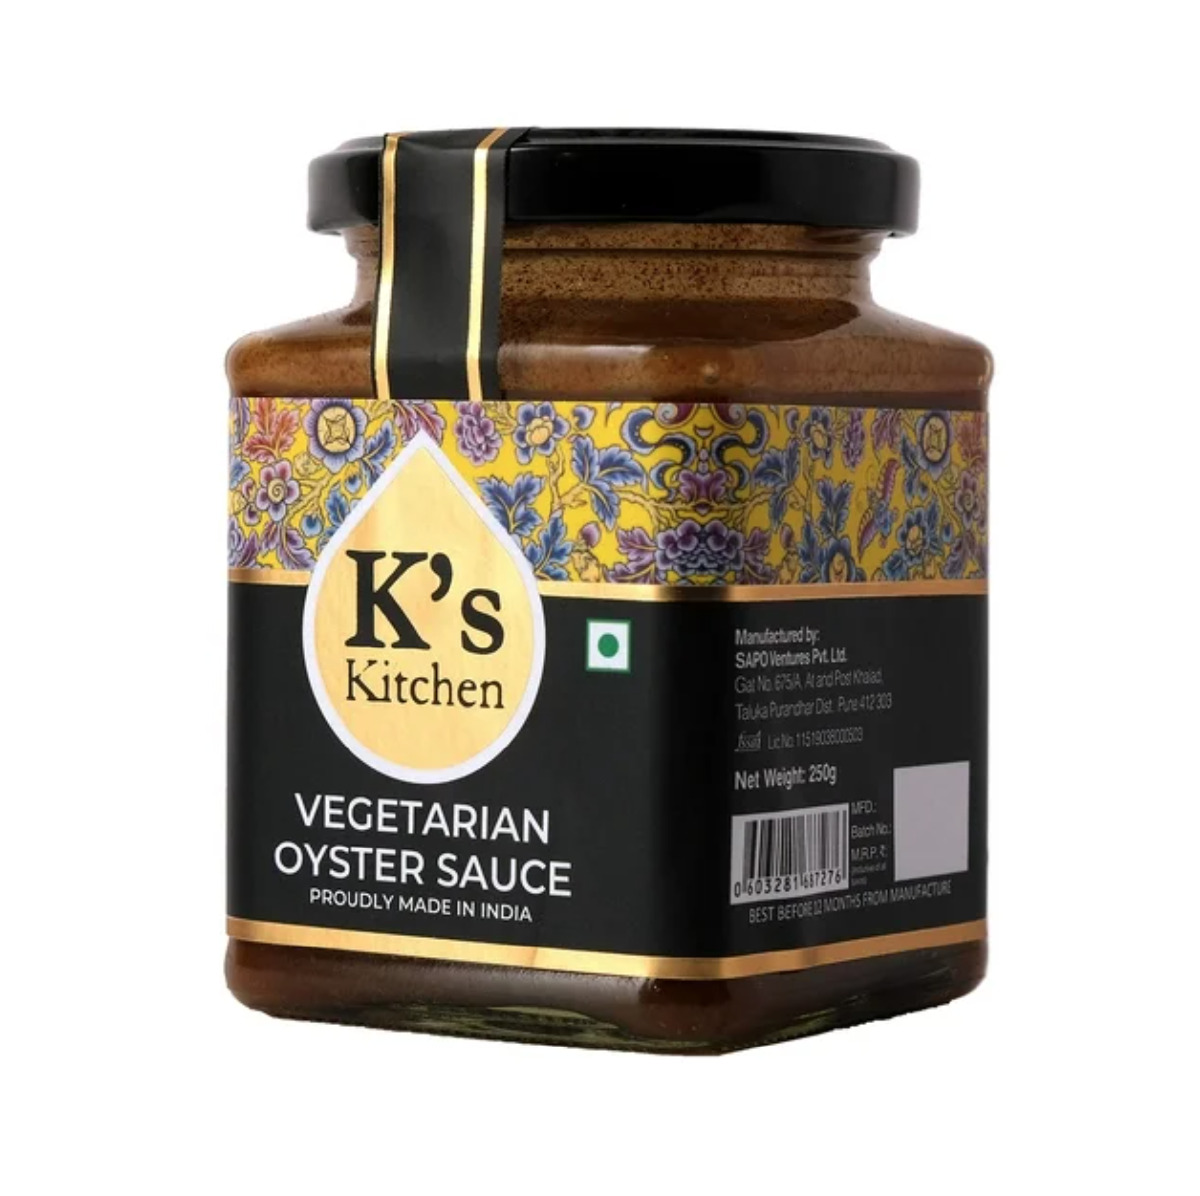 A yellow and black decorative jar of K's Kitchen vegetarian oyster sauce with black lid on a white background. 